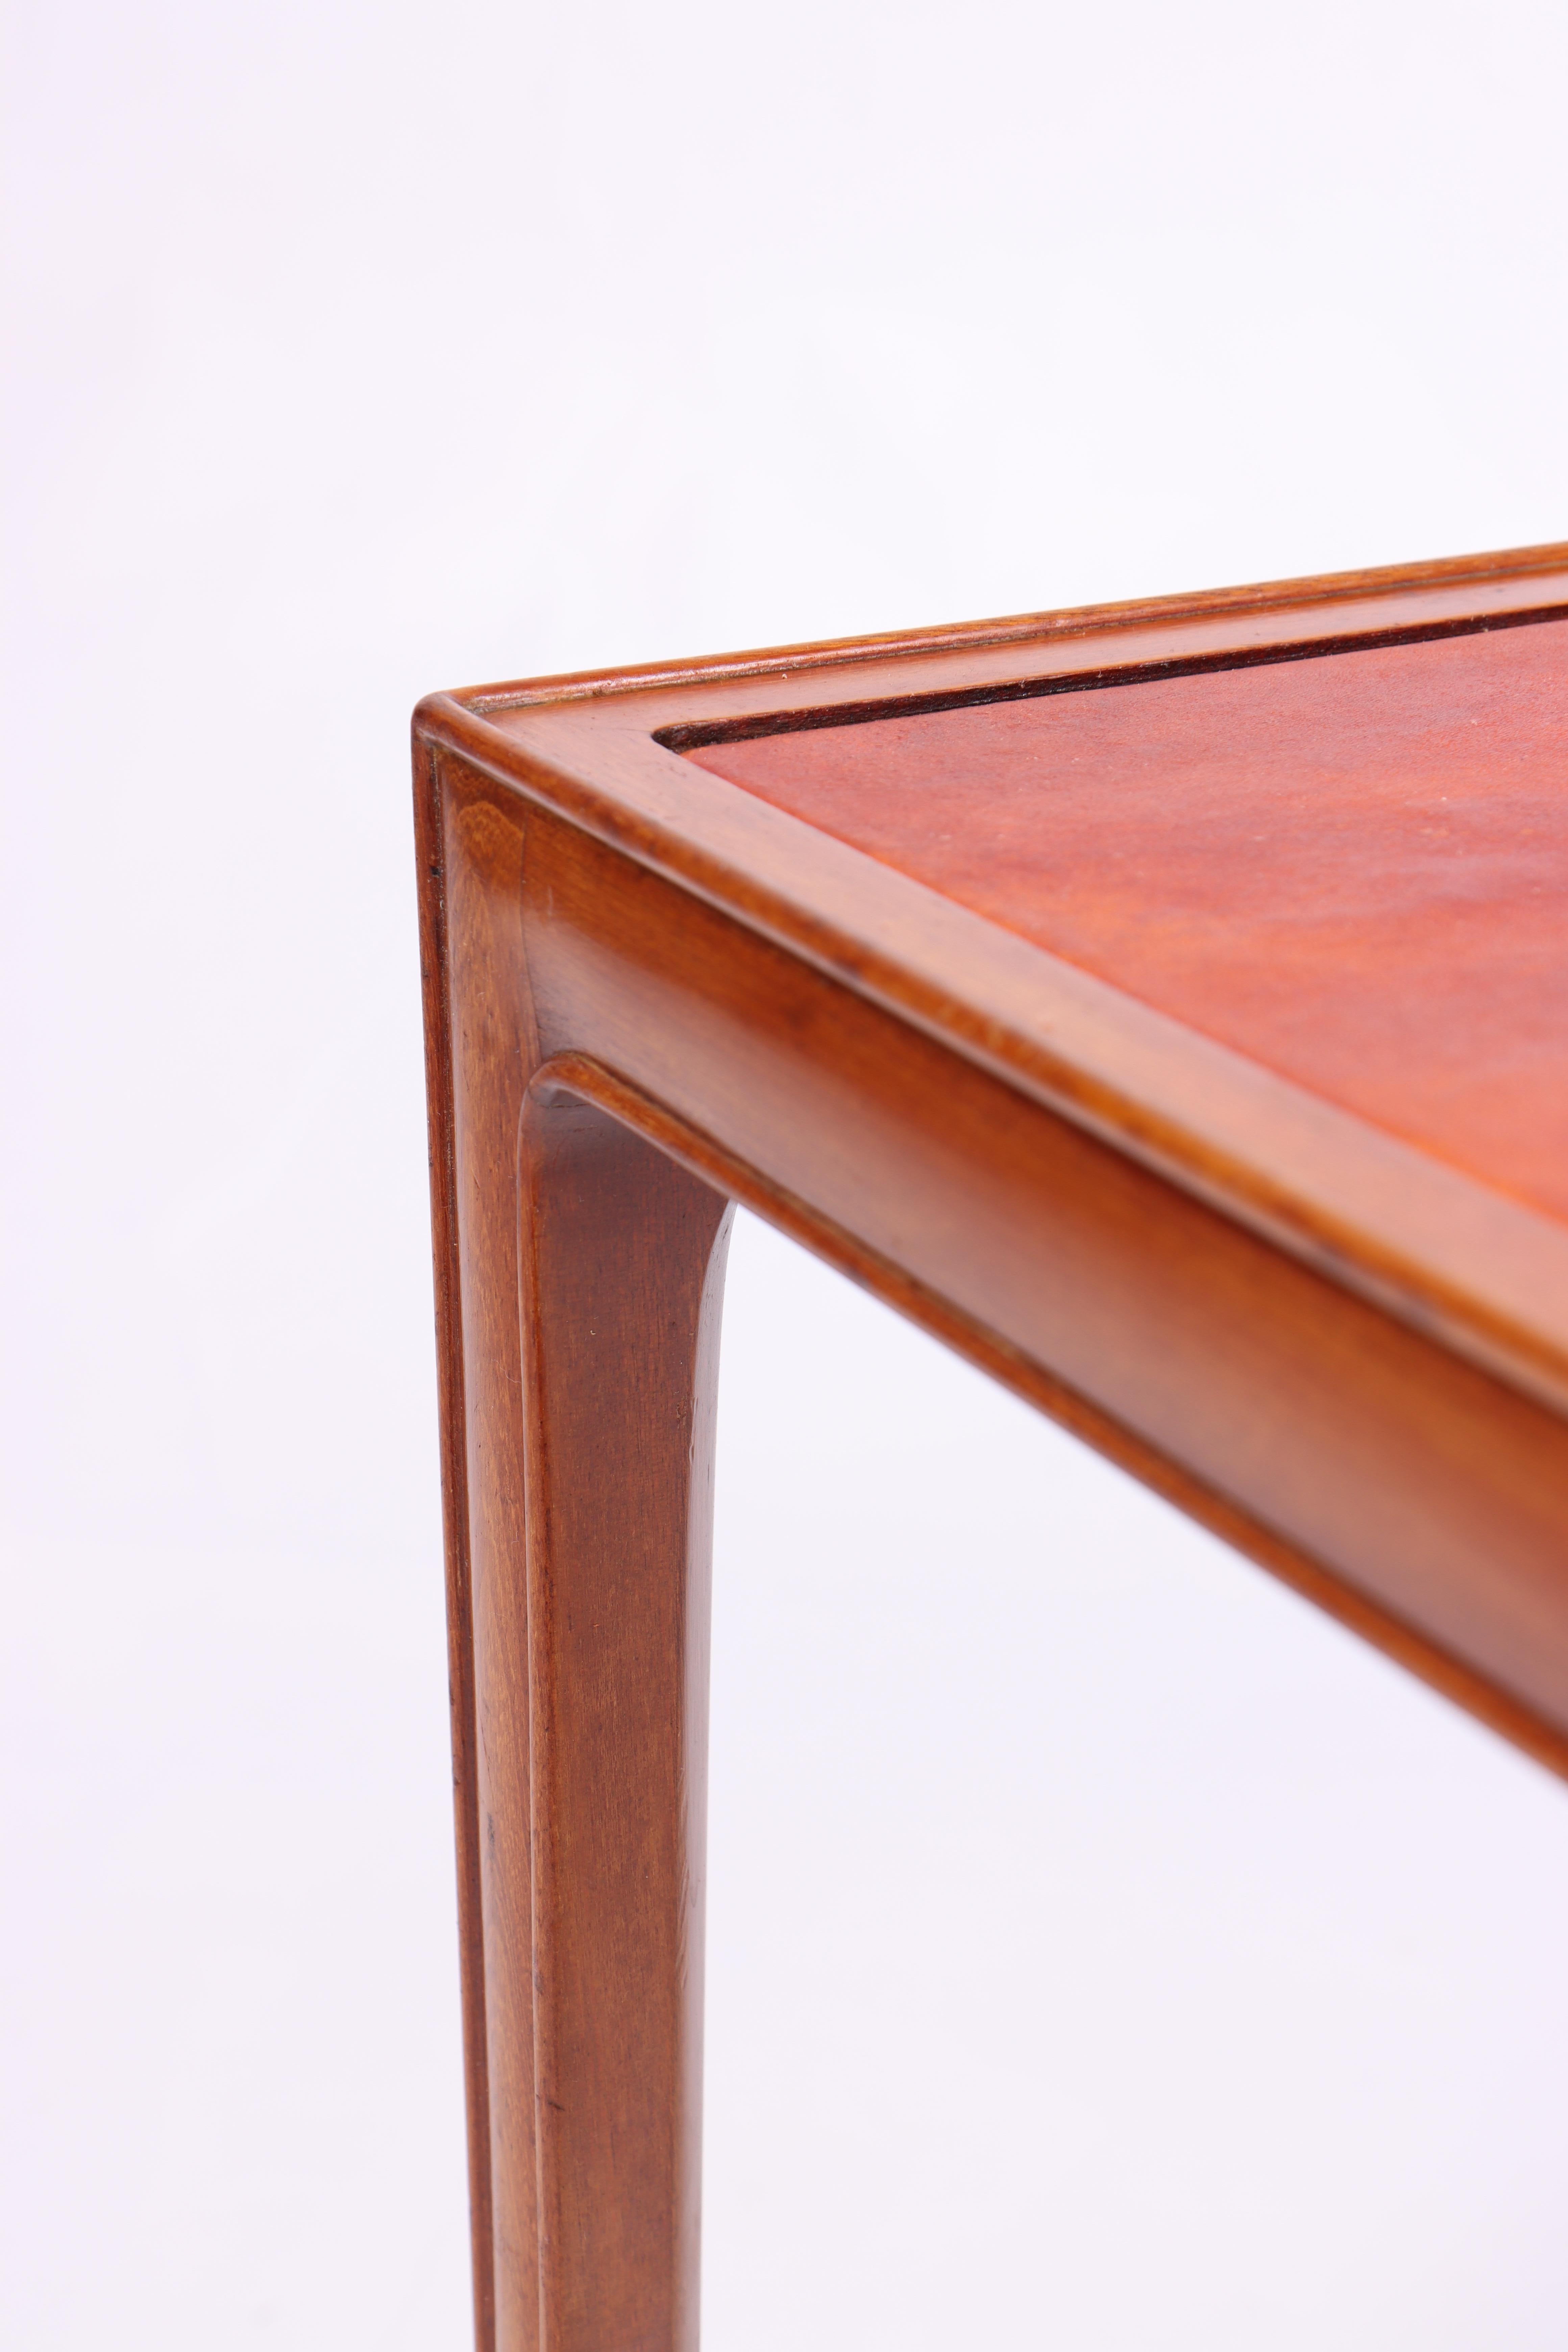 Mid-20th Century Low Table in Mahogany and Patinated Leather, Danish Cabinetmaker 1950s For Sale